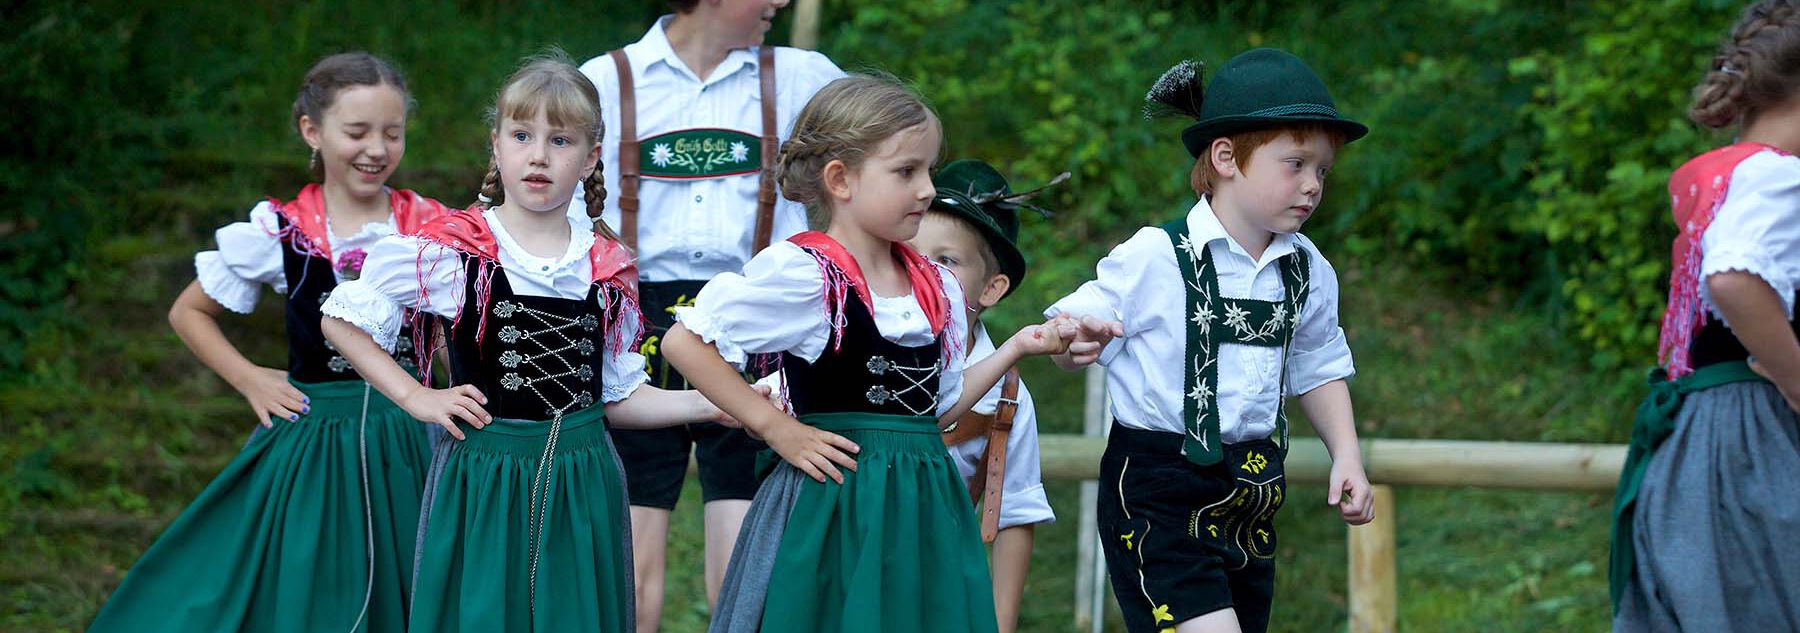 Tradition in Nesselwang